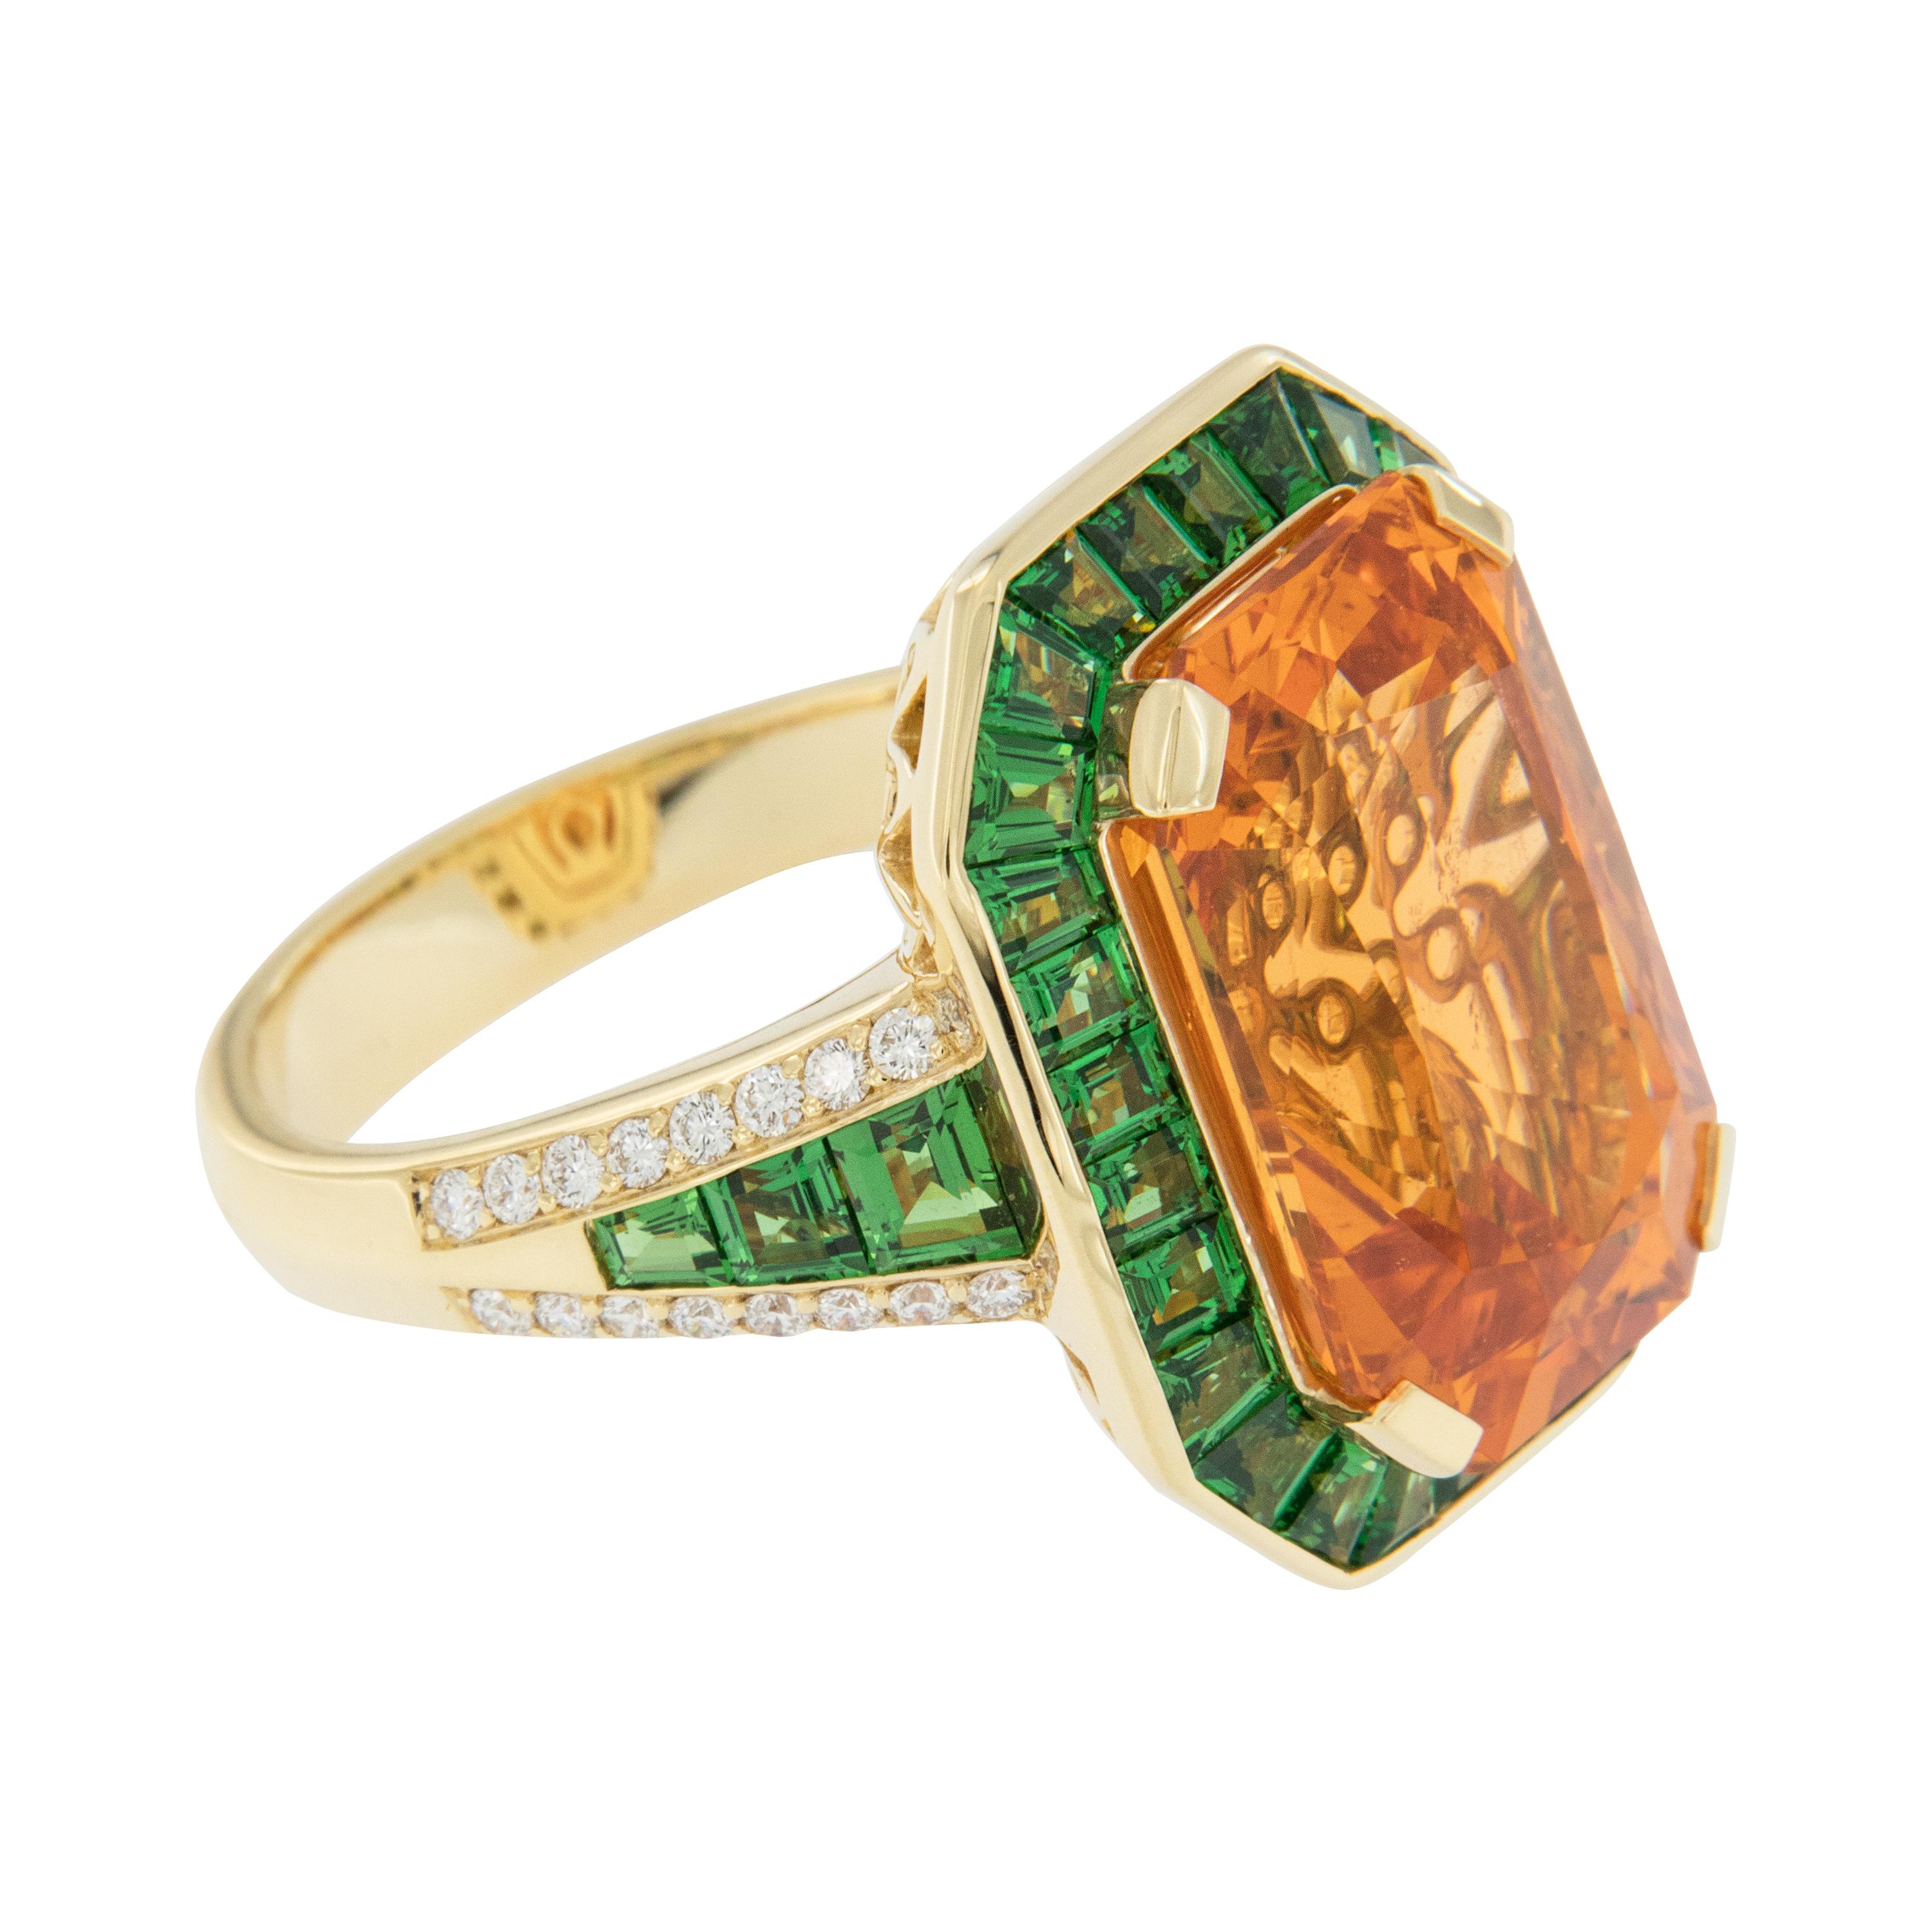  This Art Deco inspired, custom cast 18 karat yellow gold ring is set with one octagonal mixed cut Spessartine Garnet = 13.13 carats, being FANTA orange in color, VVS clarity and measuring 15.55 x 10.38 x 7.52mm with GIA Identification Report